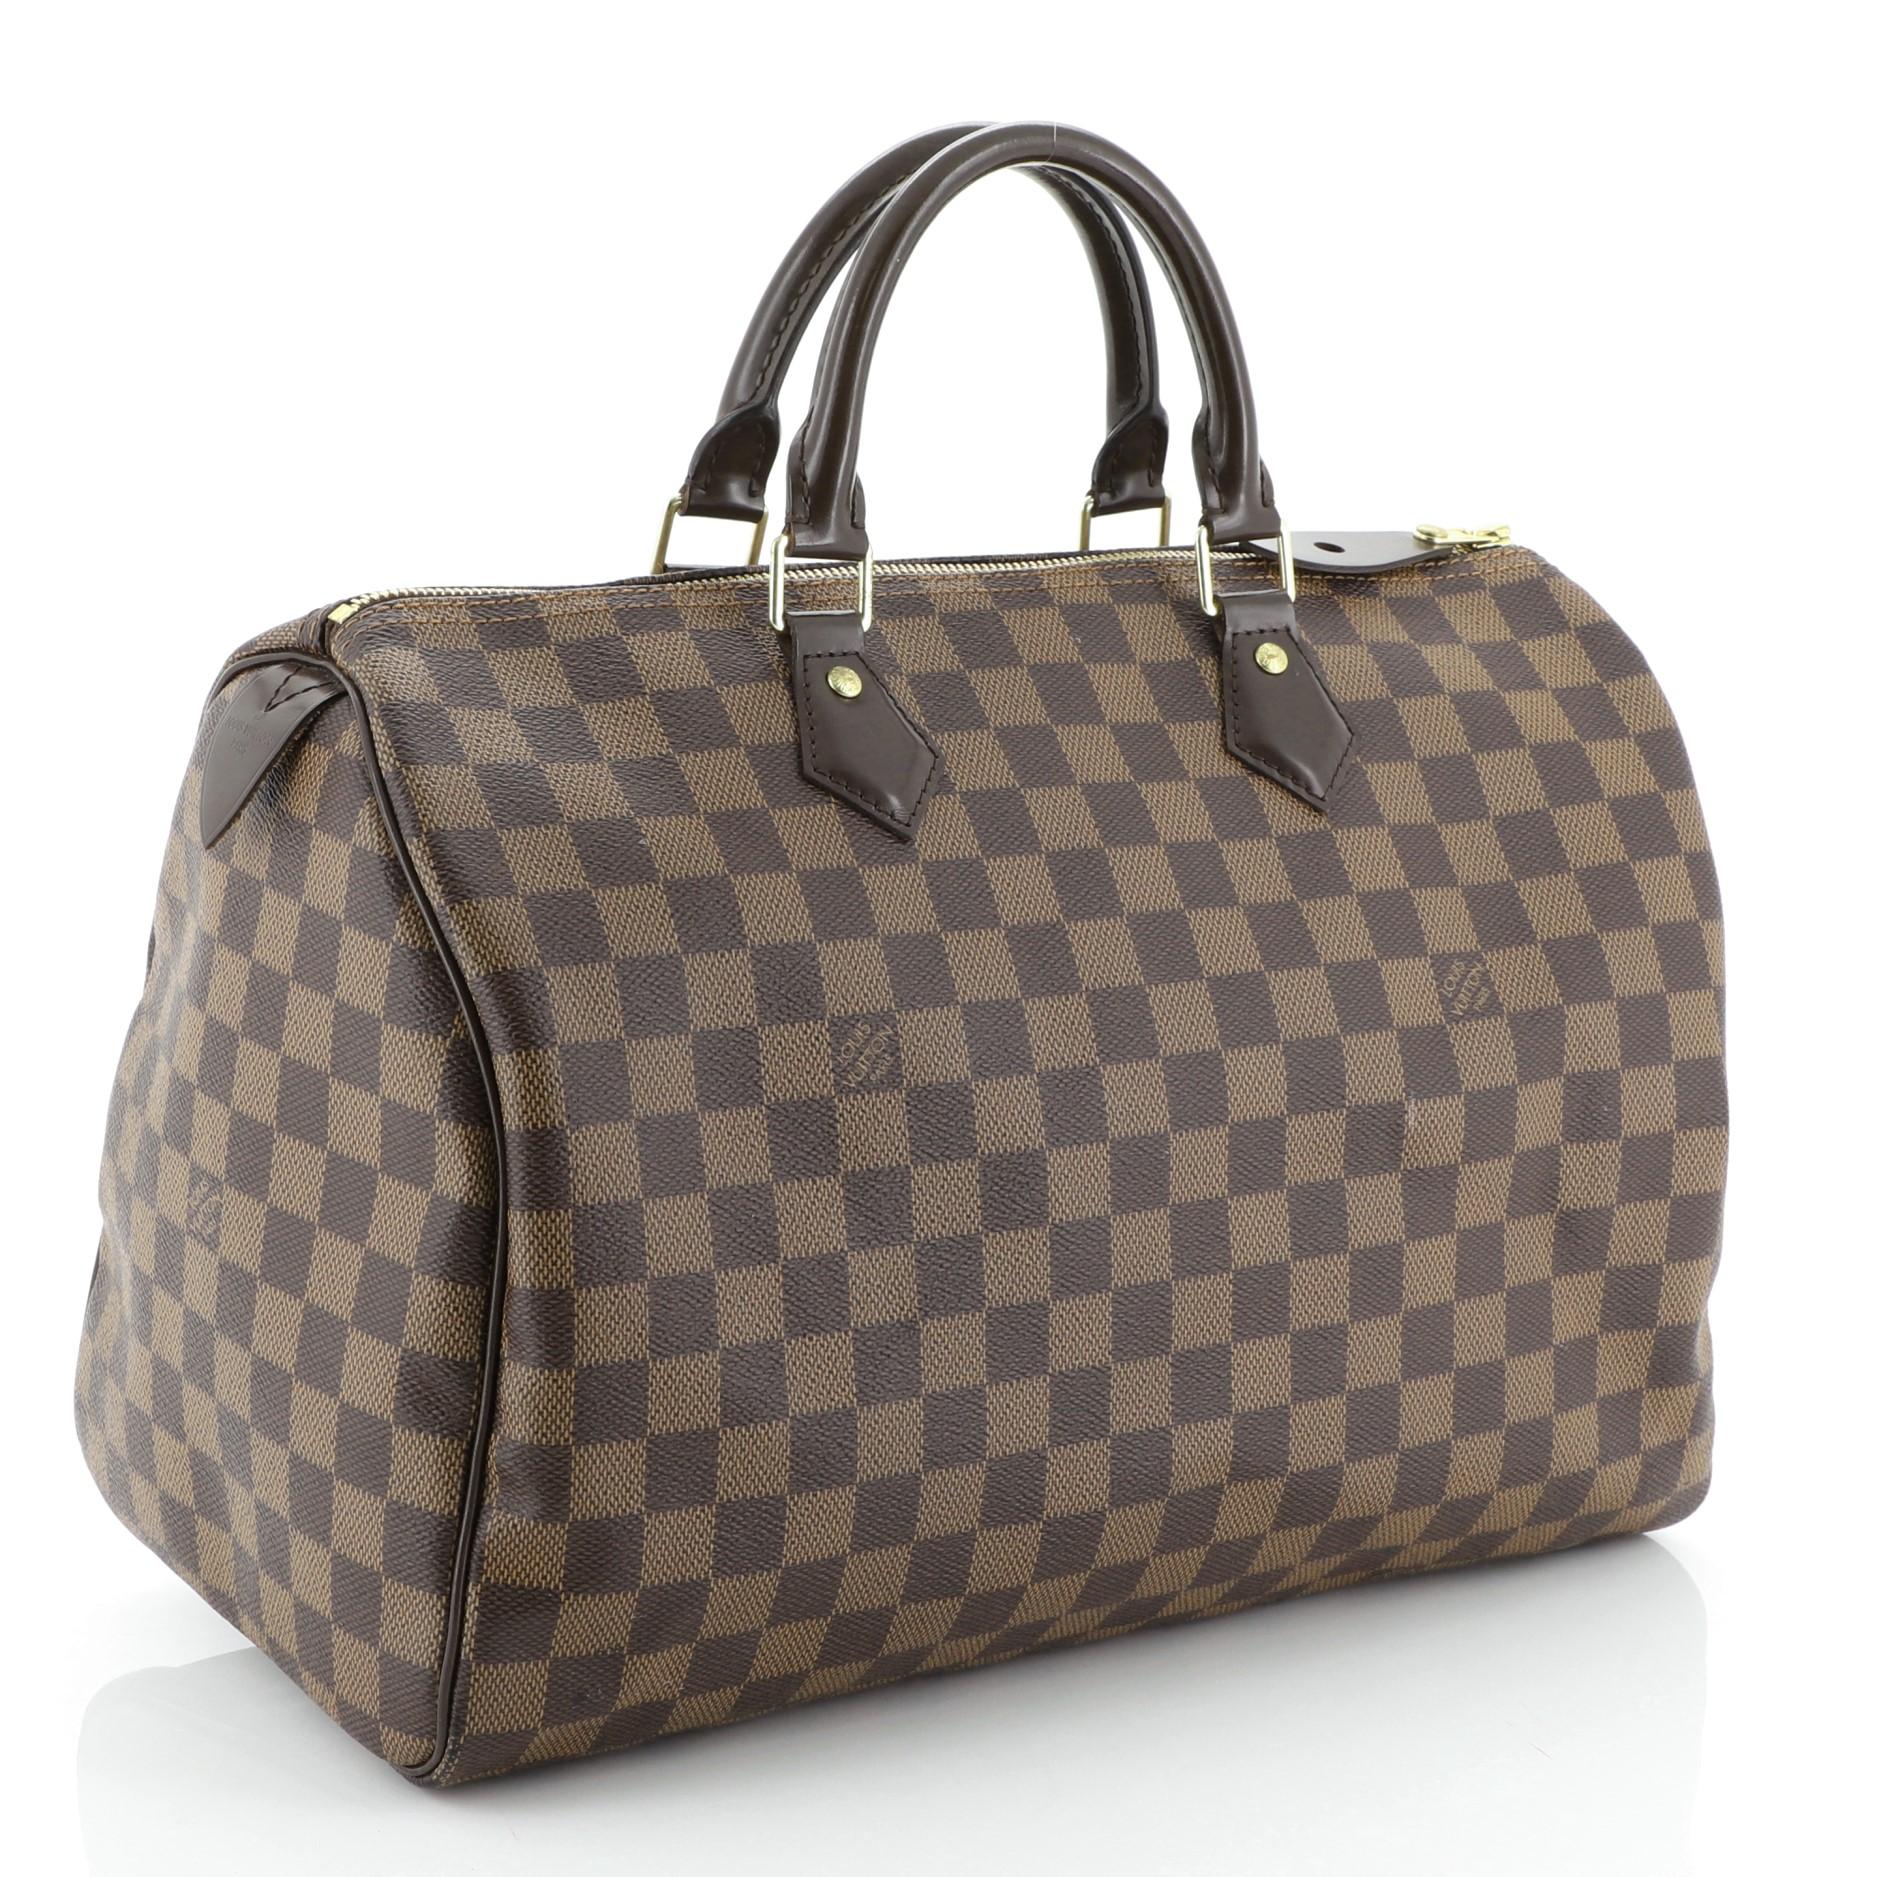 This Louis Vuitton Speedy Handbag Damier 35, crafted in damier ebene coated canvas, features dual rolled handles, leather trim and gold-tone hardware. Its zip closure opens to a red fabric interior with slip pocket. Authenticity code reads: SD2165.